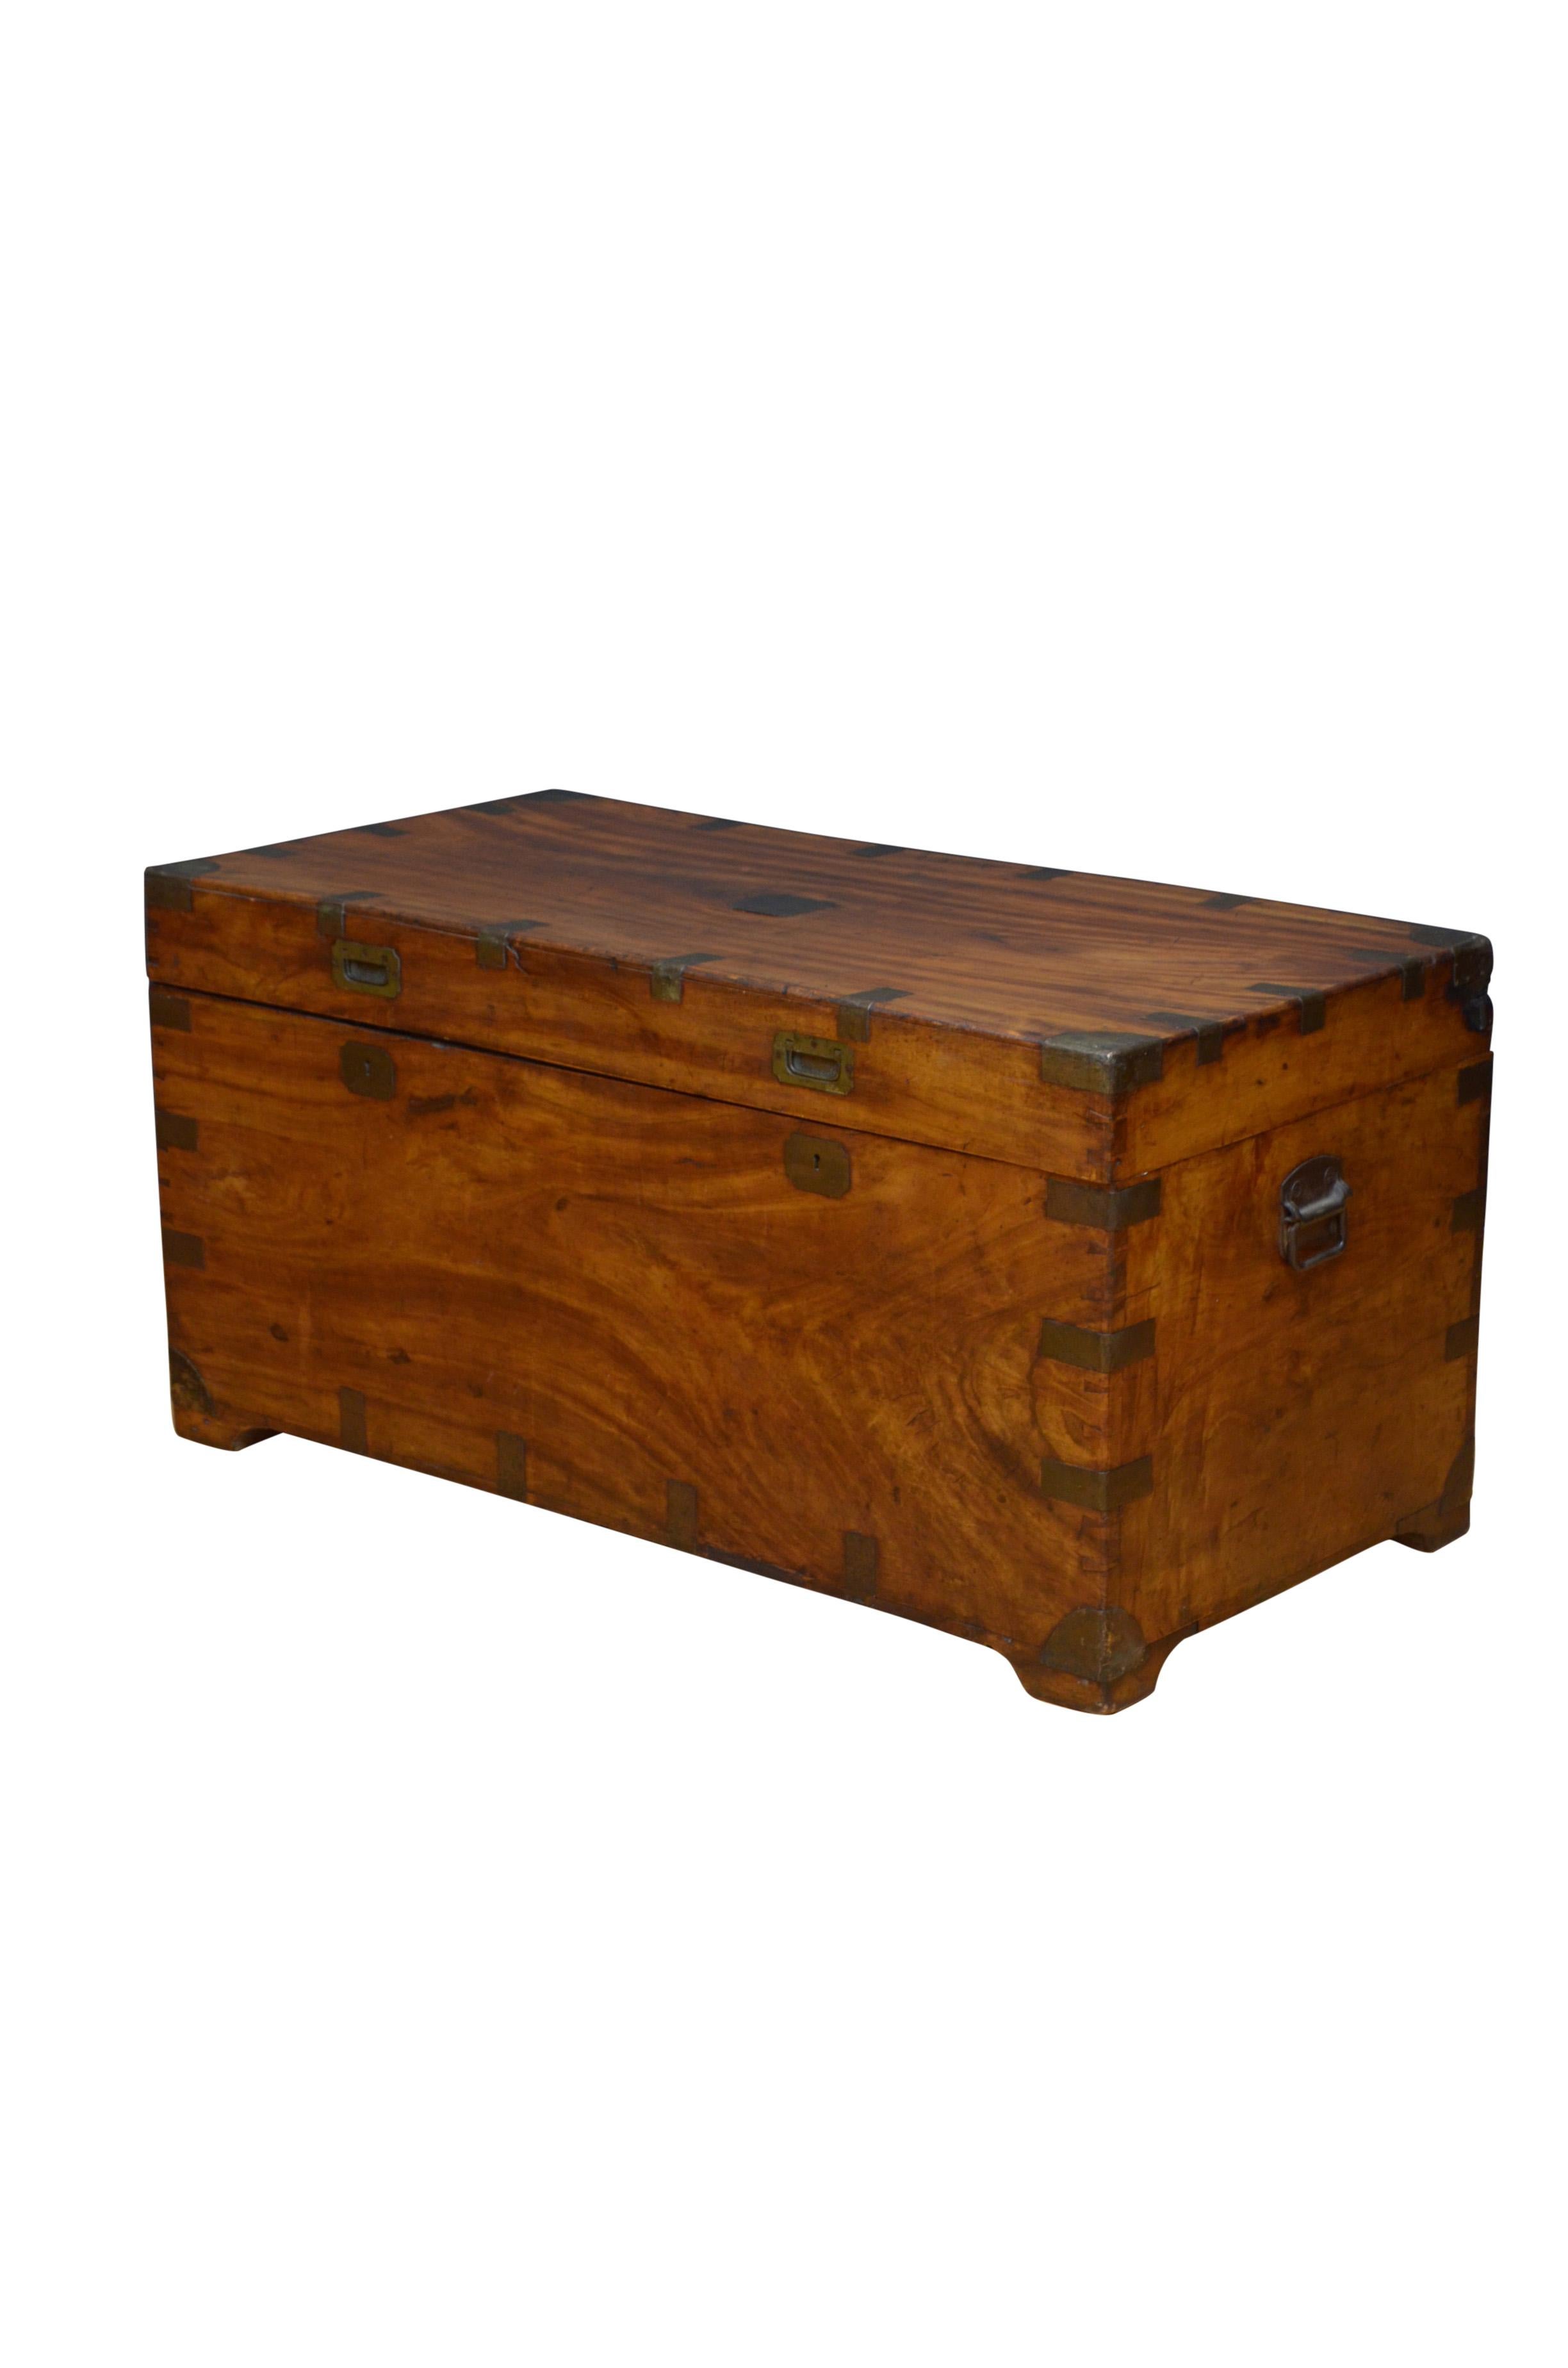 K0172 Extra large19th century camphor wood military trunk with brass corners and hinged lid which opens to reveal a large compartment space, the sides of the trunk having the original metal carrying handles. This antique trunk shows signs of usage,